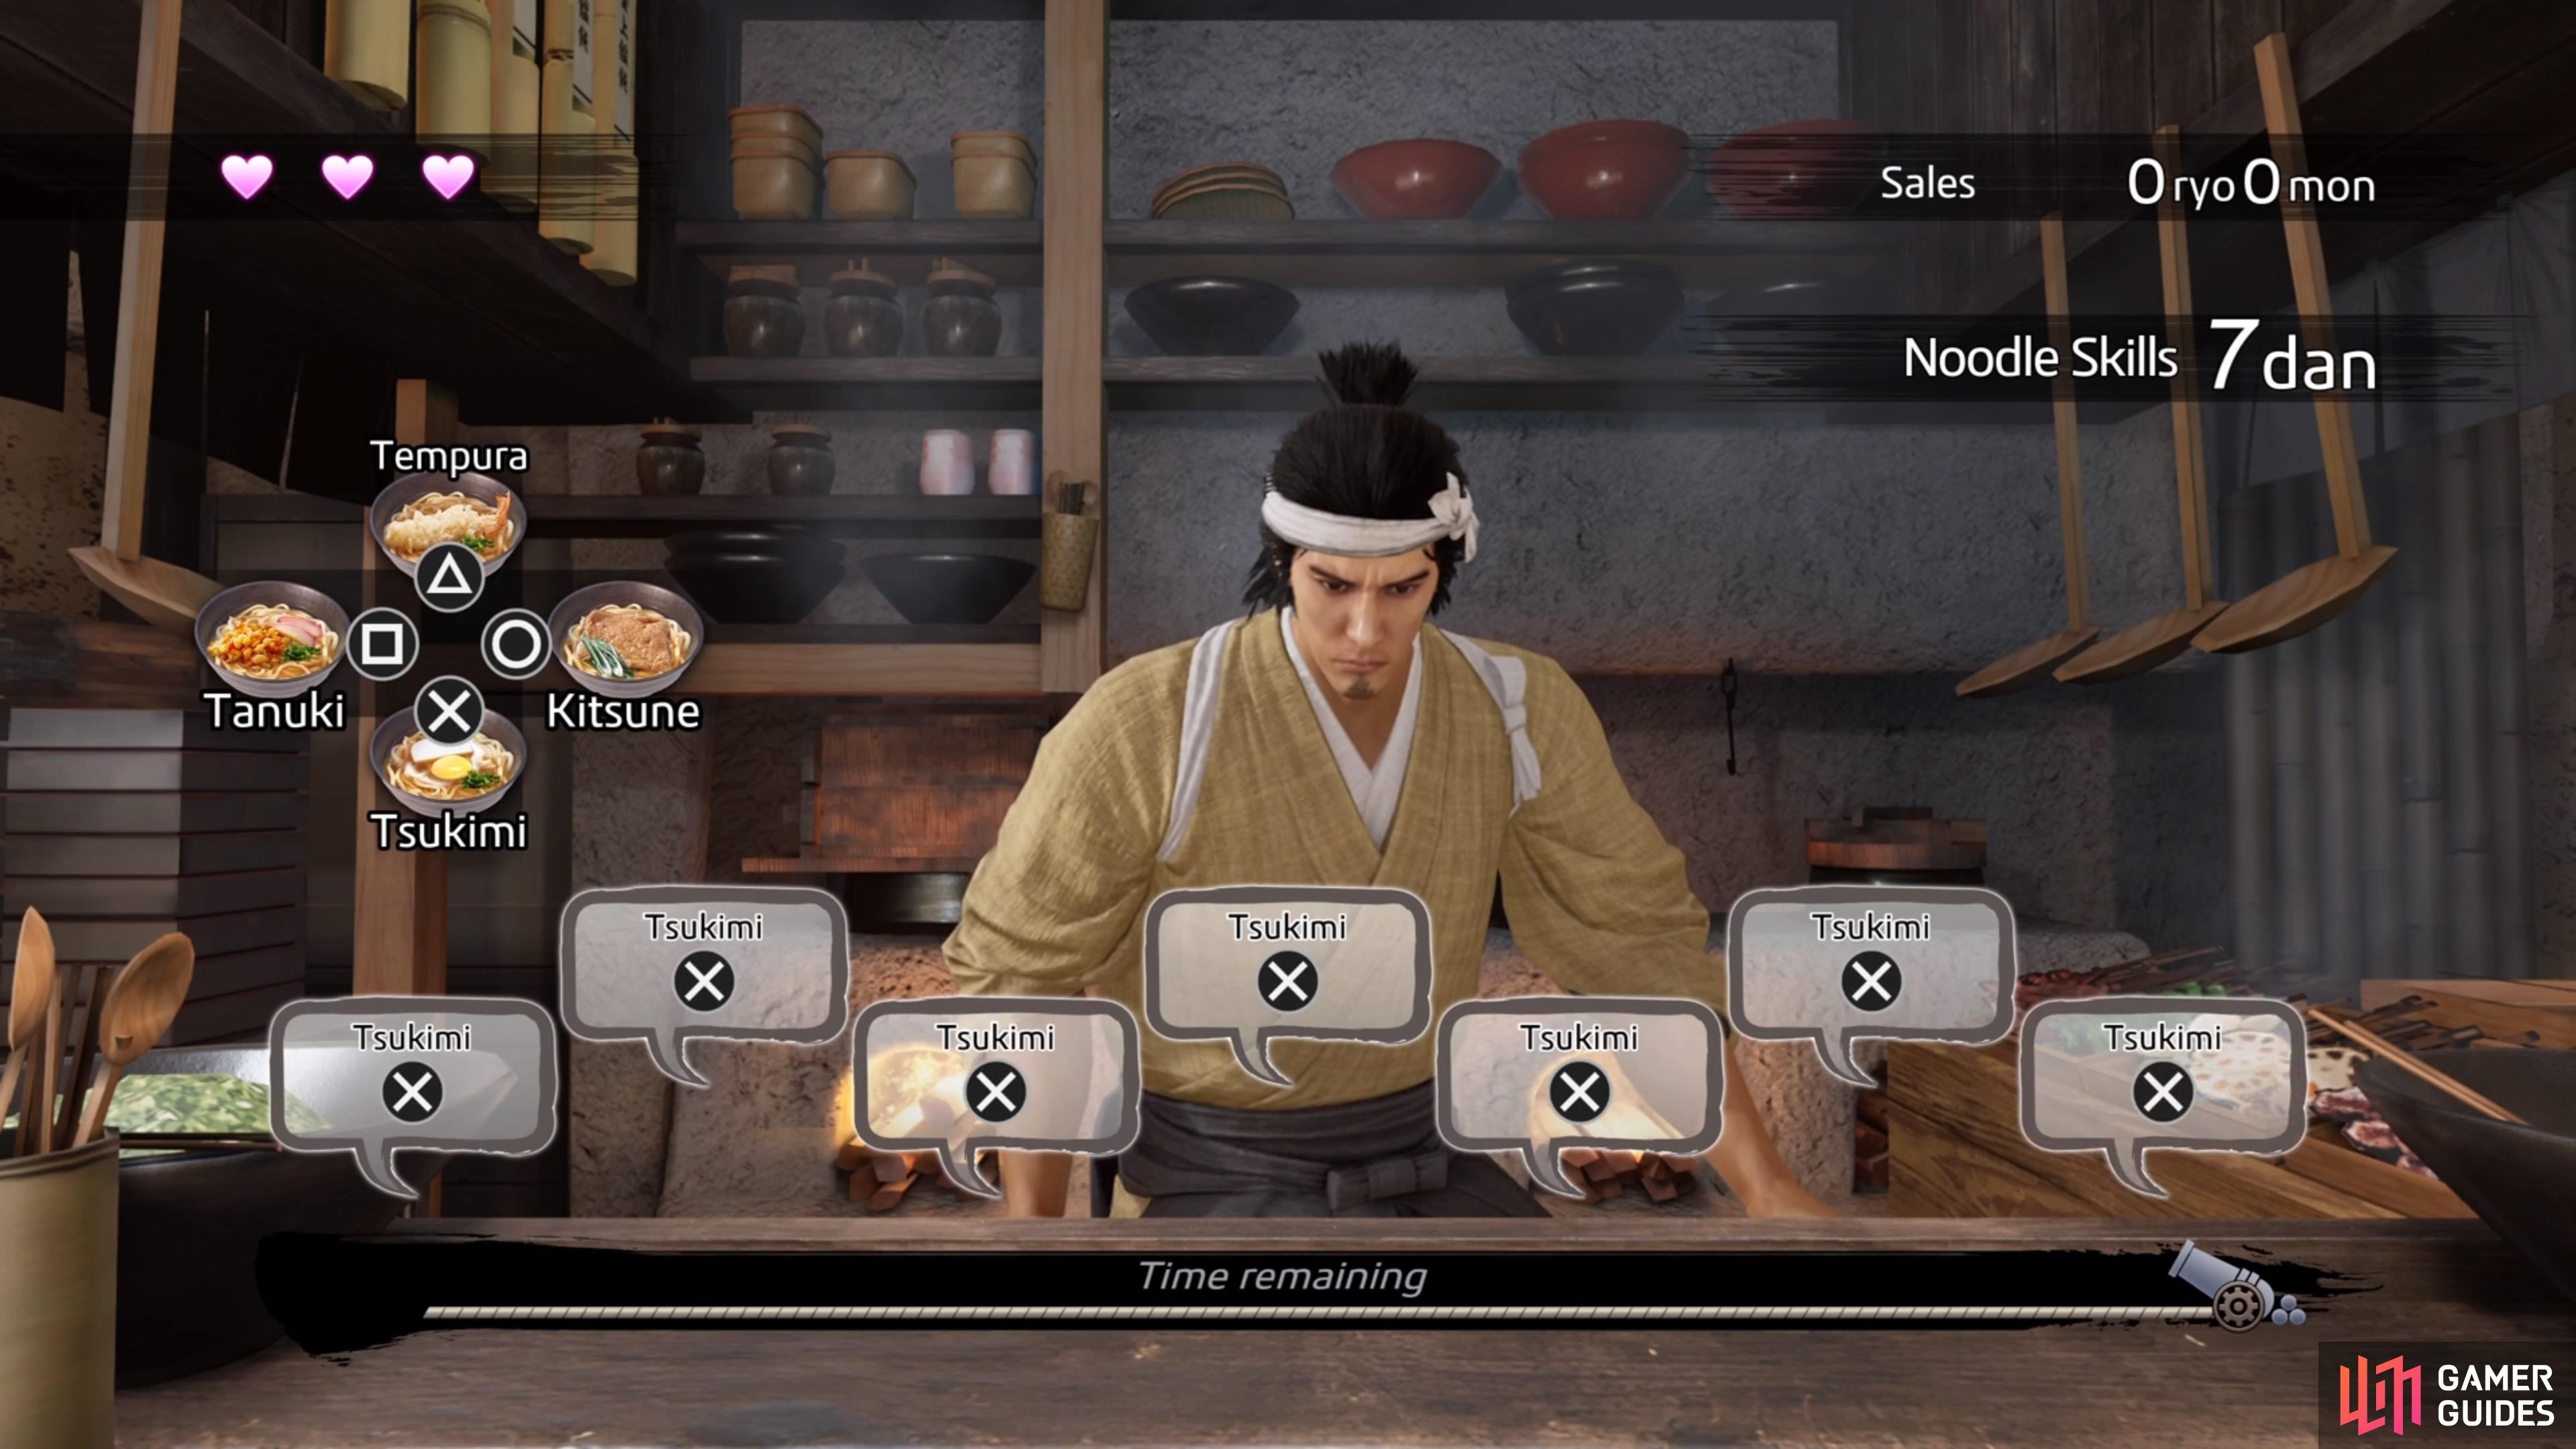 The Chef's Recommendation turns all inputs to the same button